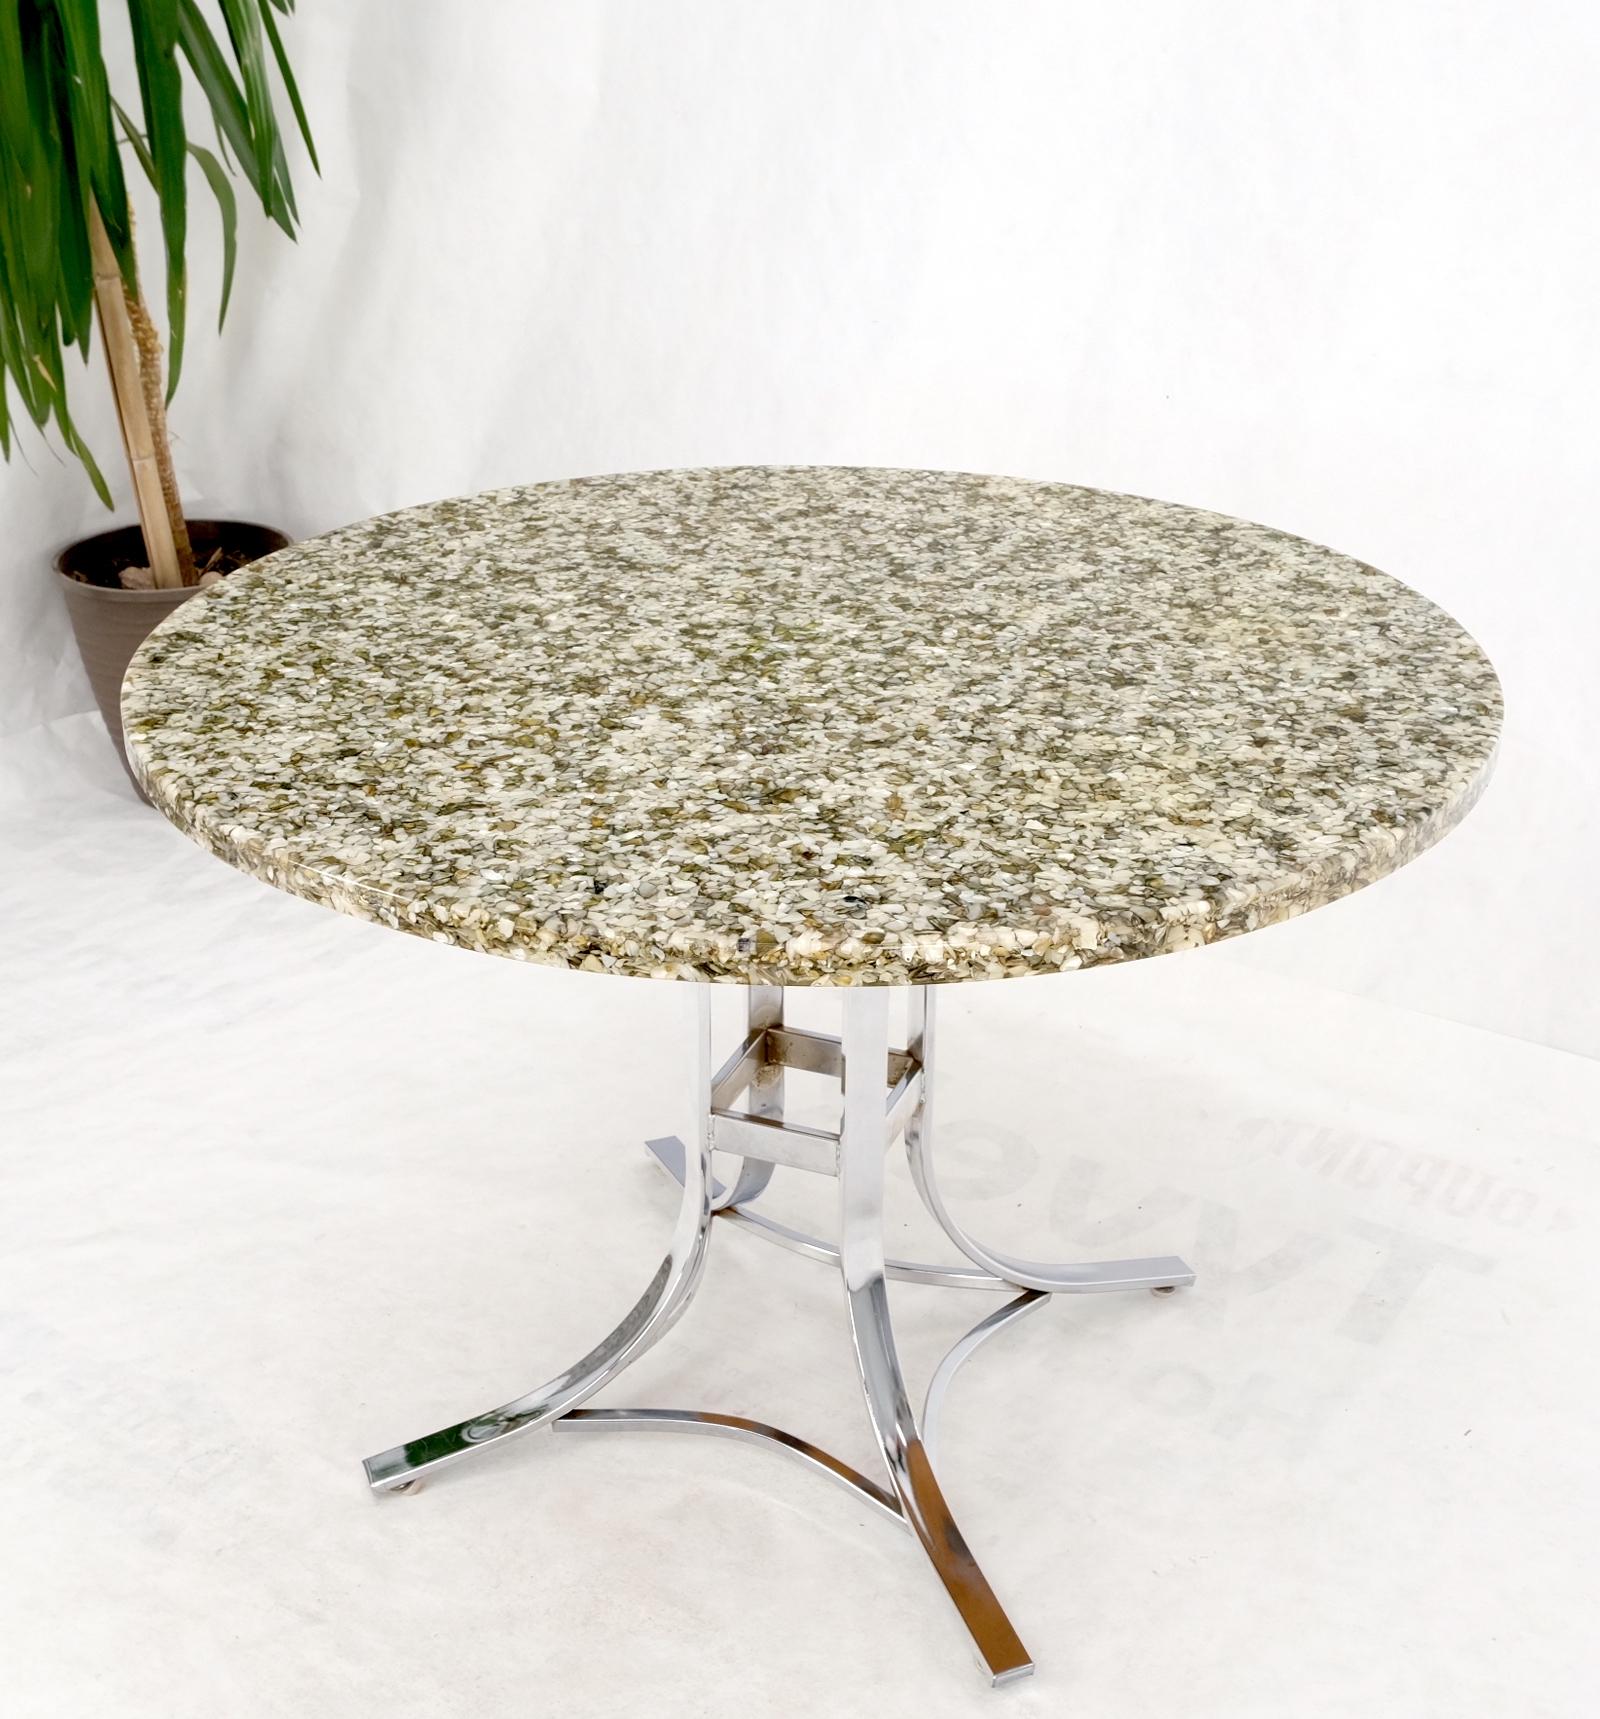 Abalone Shell Resin Fusion Cast Round Top Table on Chrome Base Mid-Century Moder For Sale 2